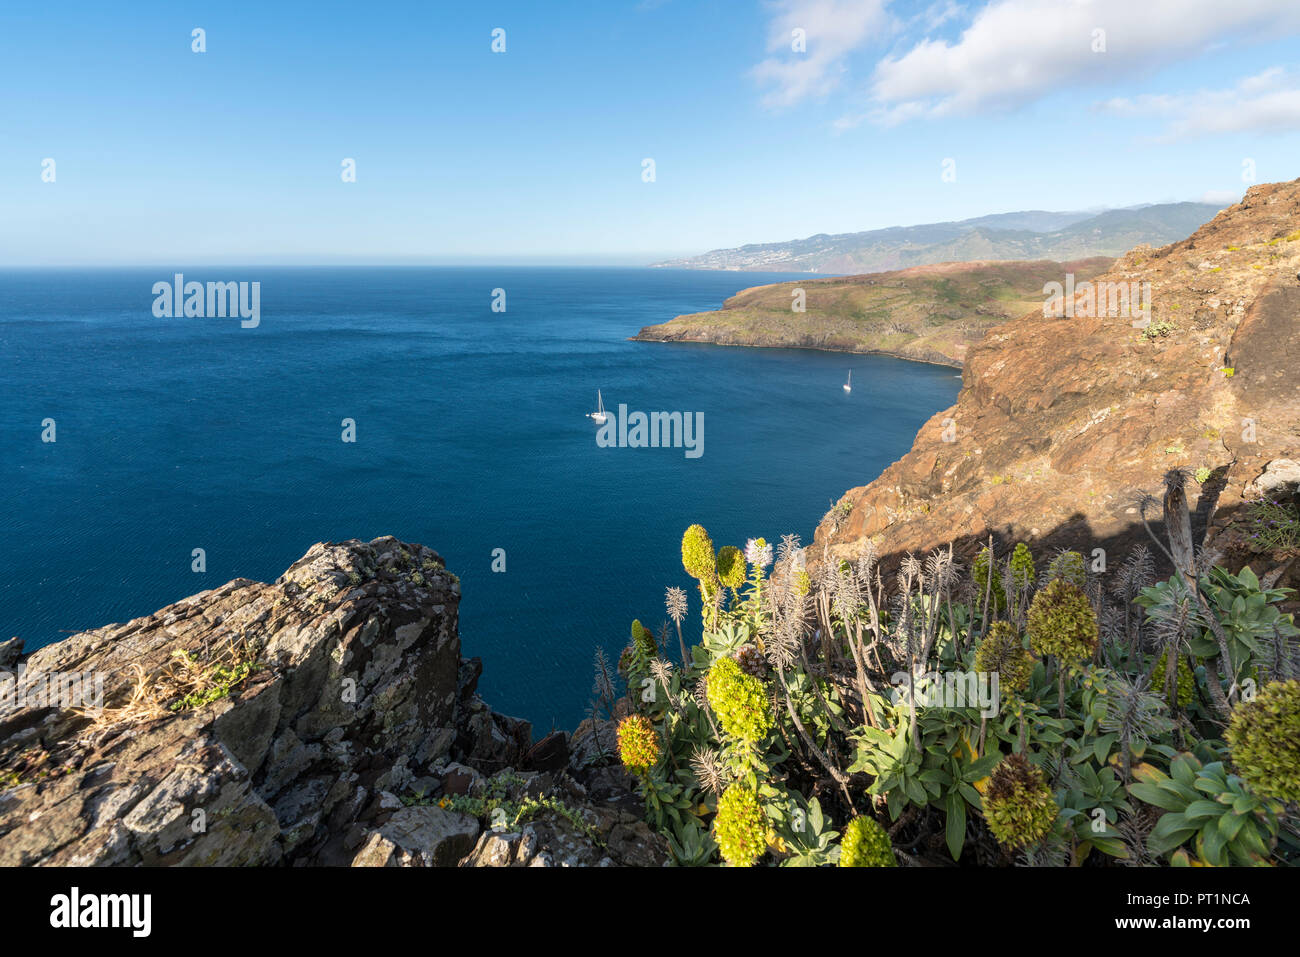 Boats sailing on the Atlantic Ocean at Point of St Lawrence, Canical, Machico district, Madeira region, Portugal, Stock Photo